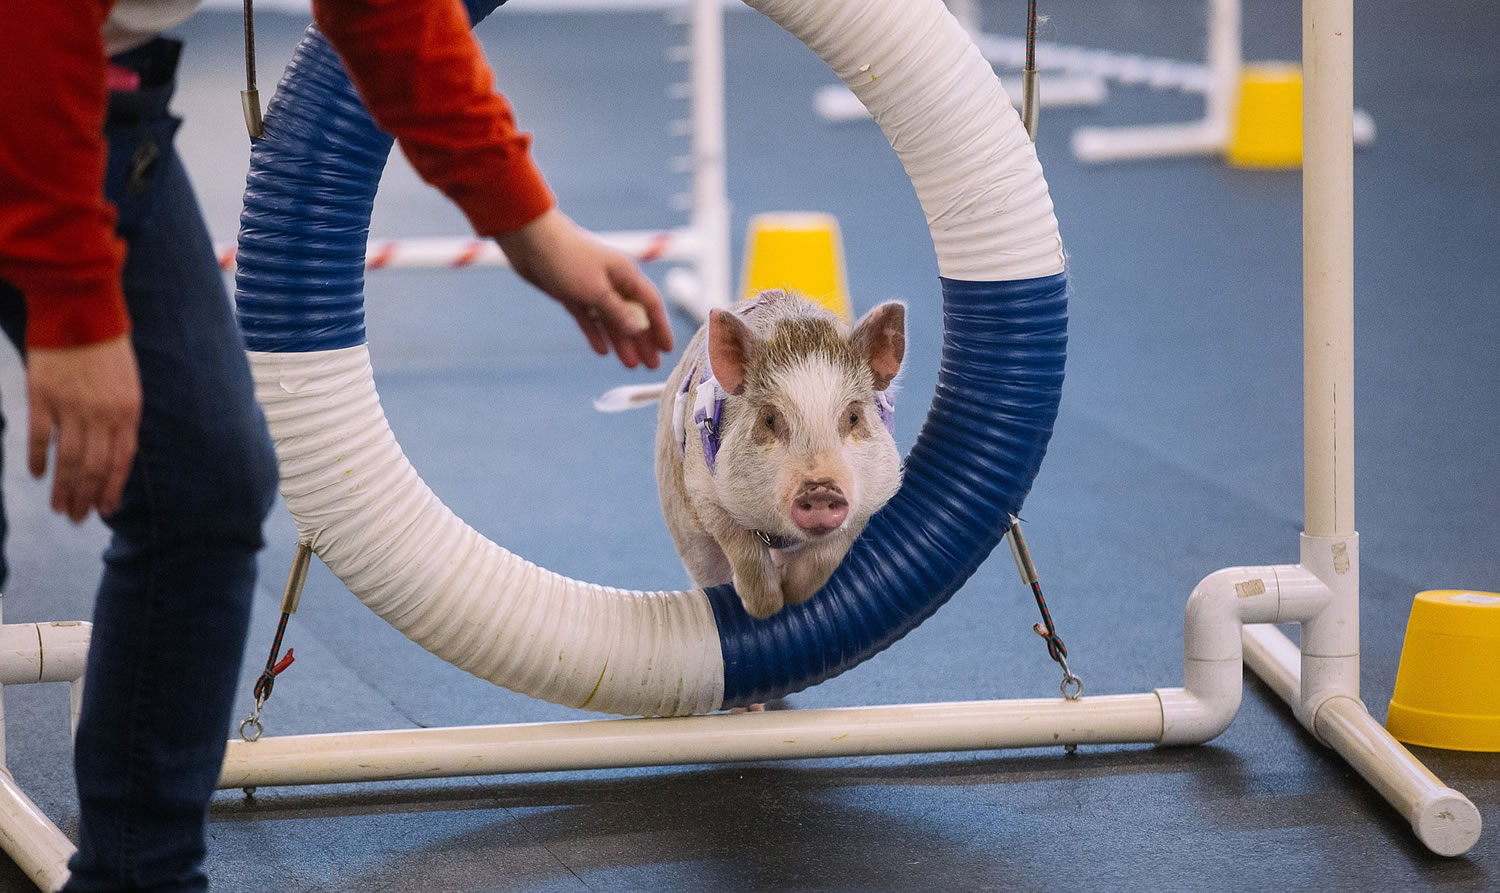 Amy, an indoor pig owned by Lori Stock, goes through agility training intended for dogs Feb.